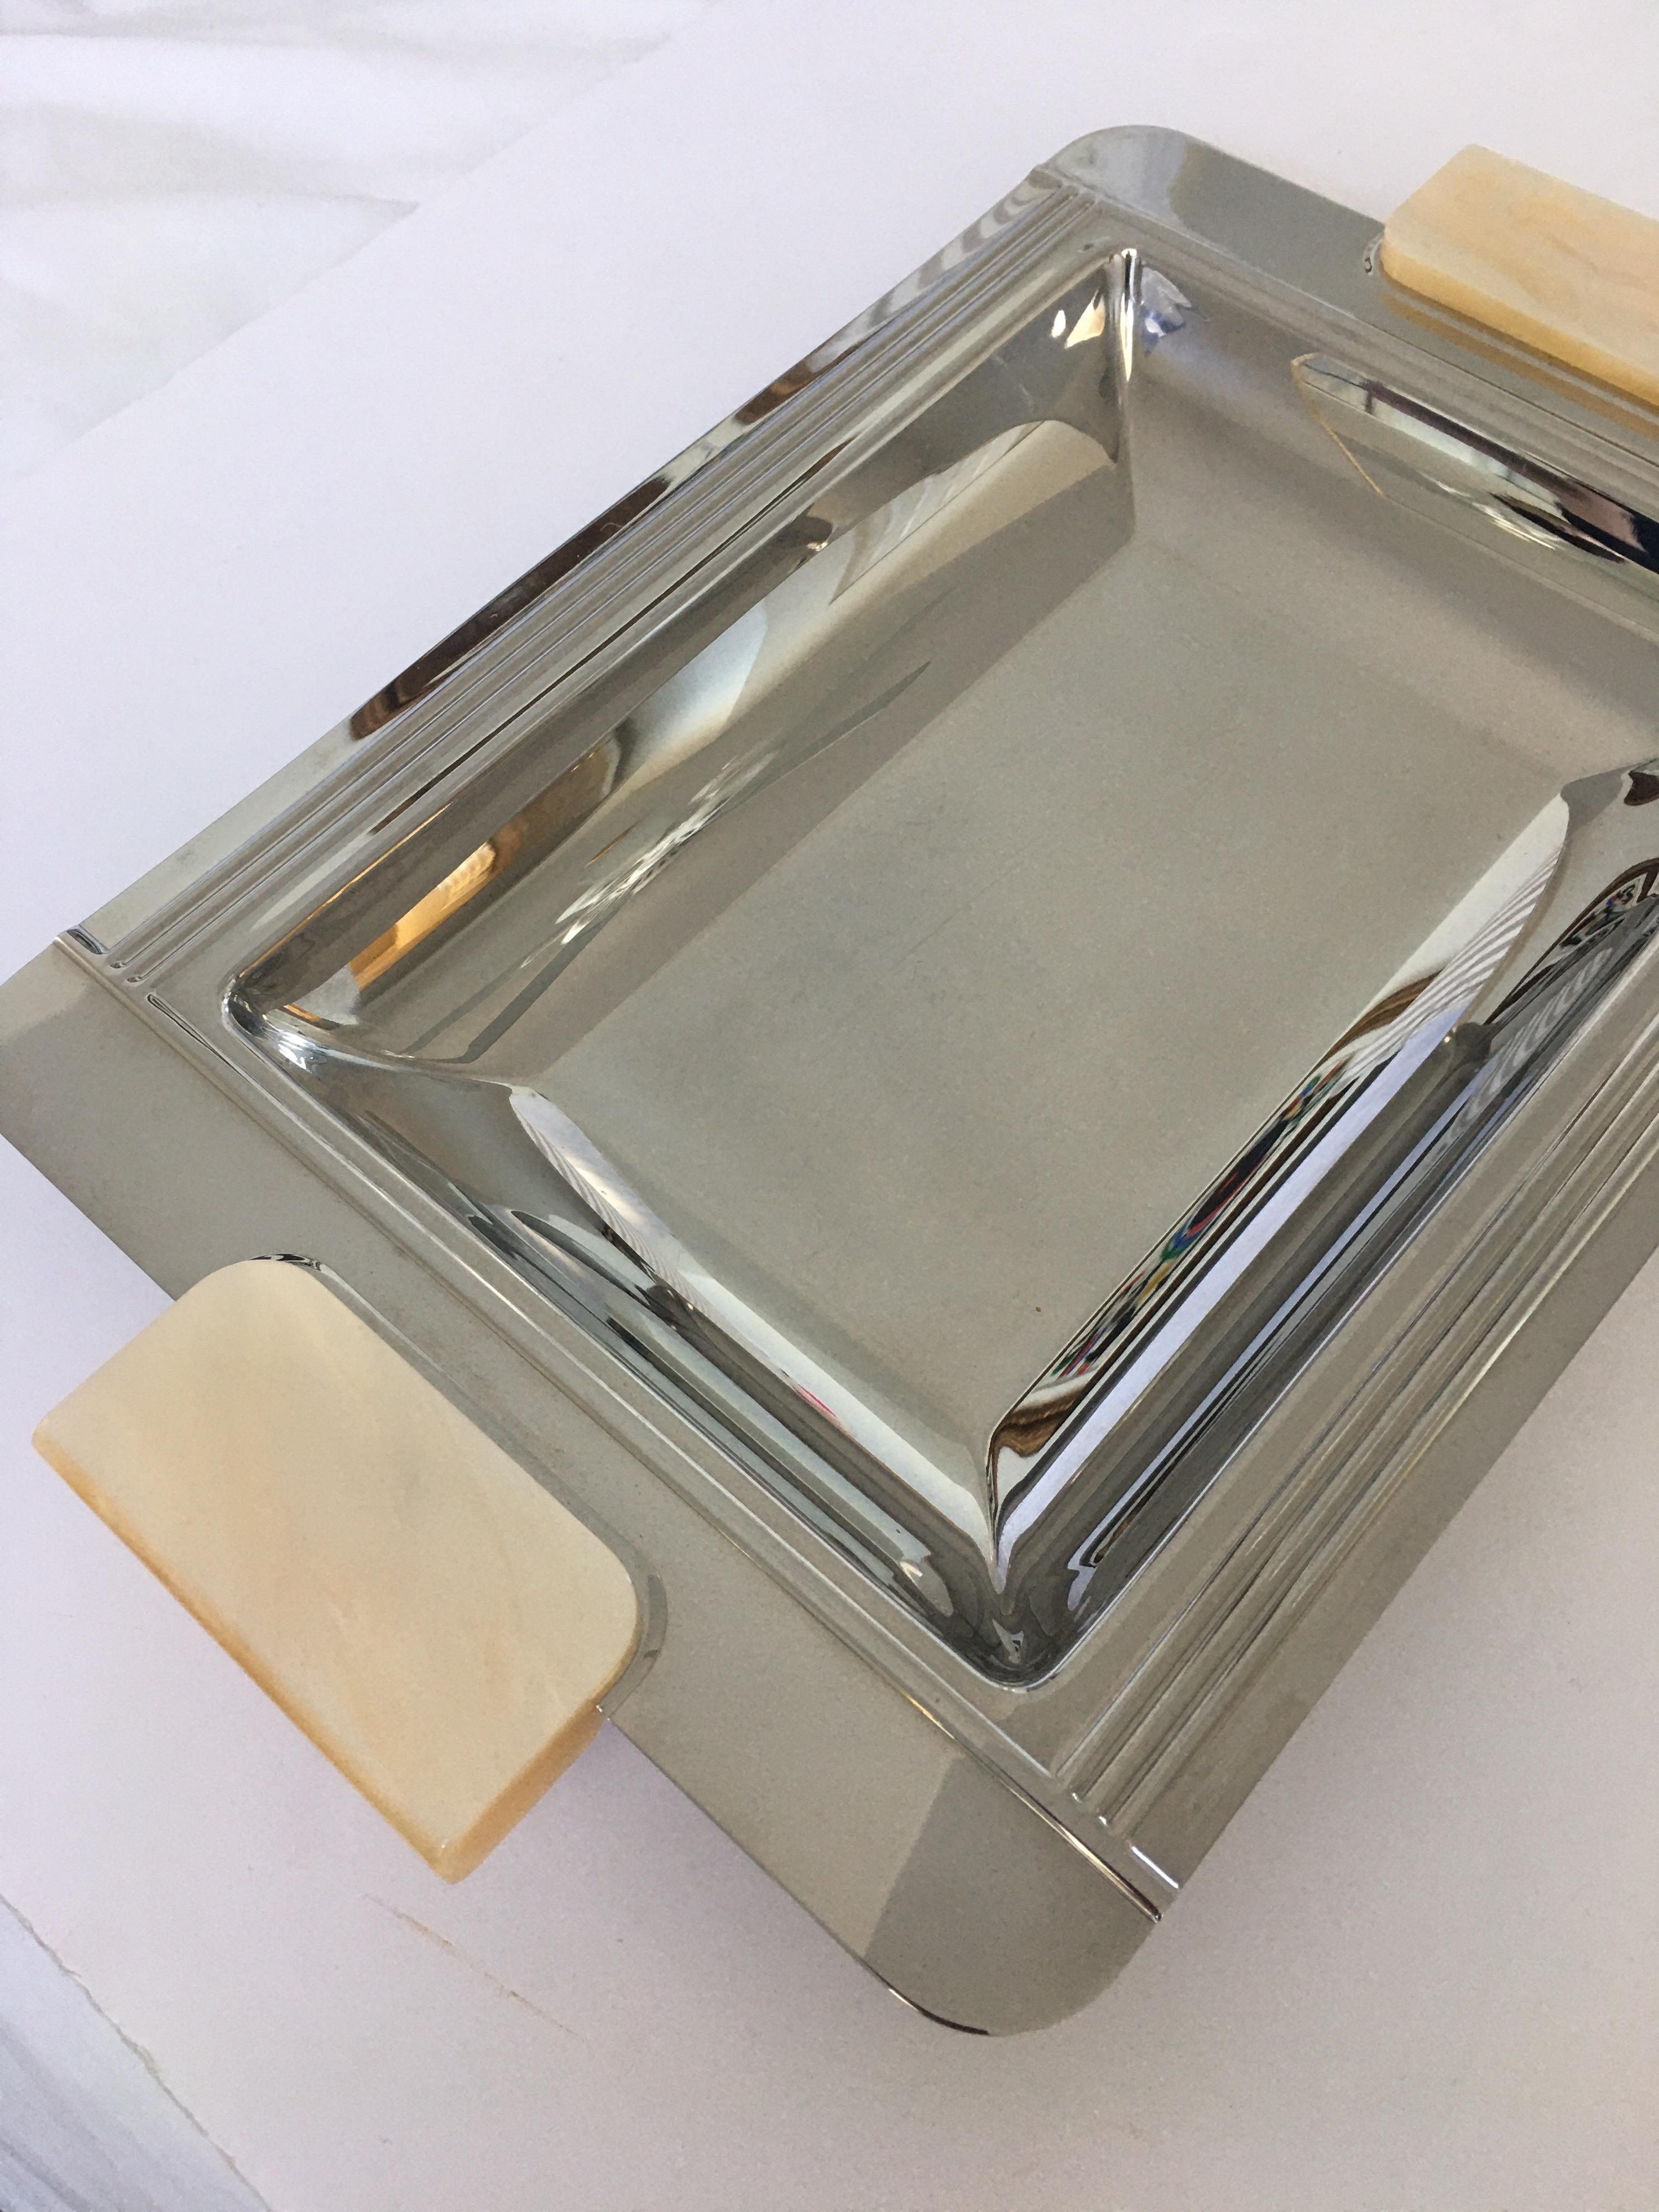 French Art Deco stainless steel serving tray by Couzon, France. This handsome rectangular tray features resin onyx or mother of pearl handles. A beautiful serving or bar ware tray.